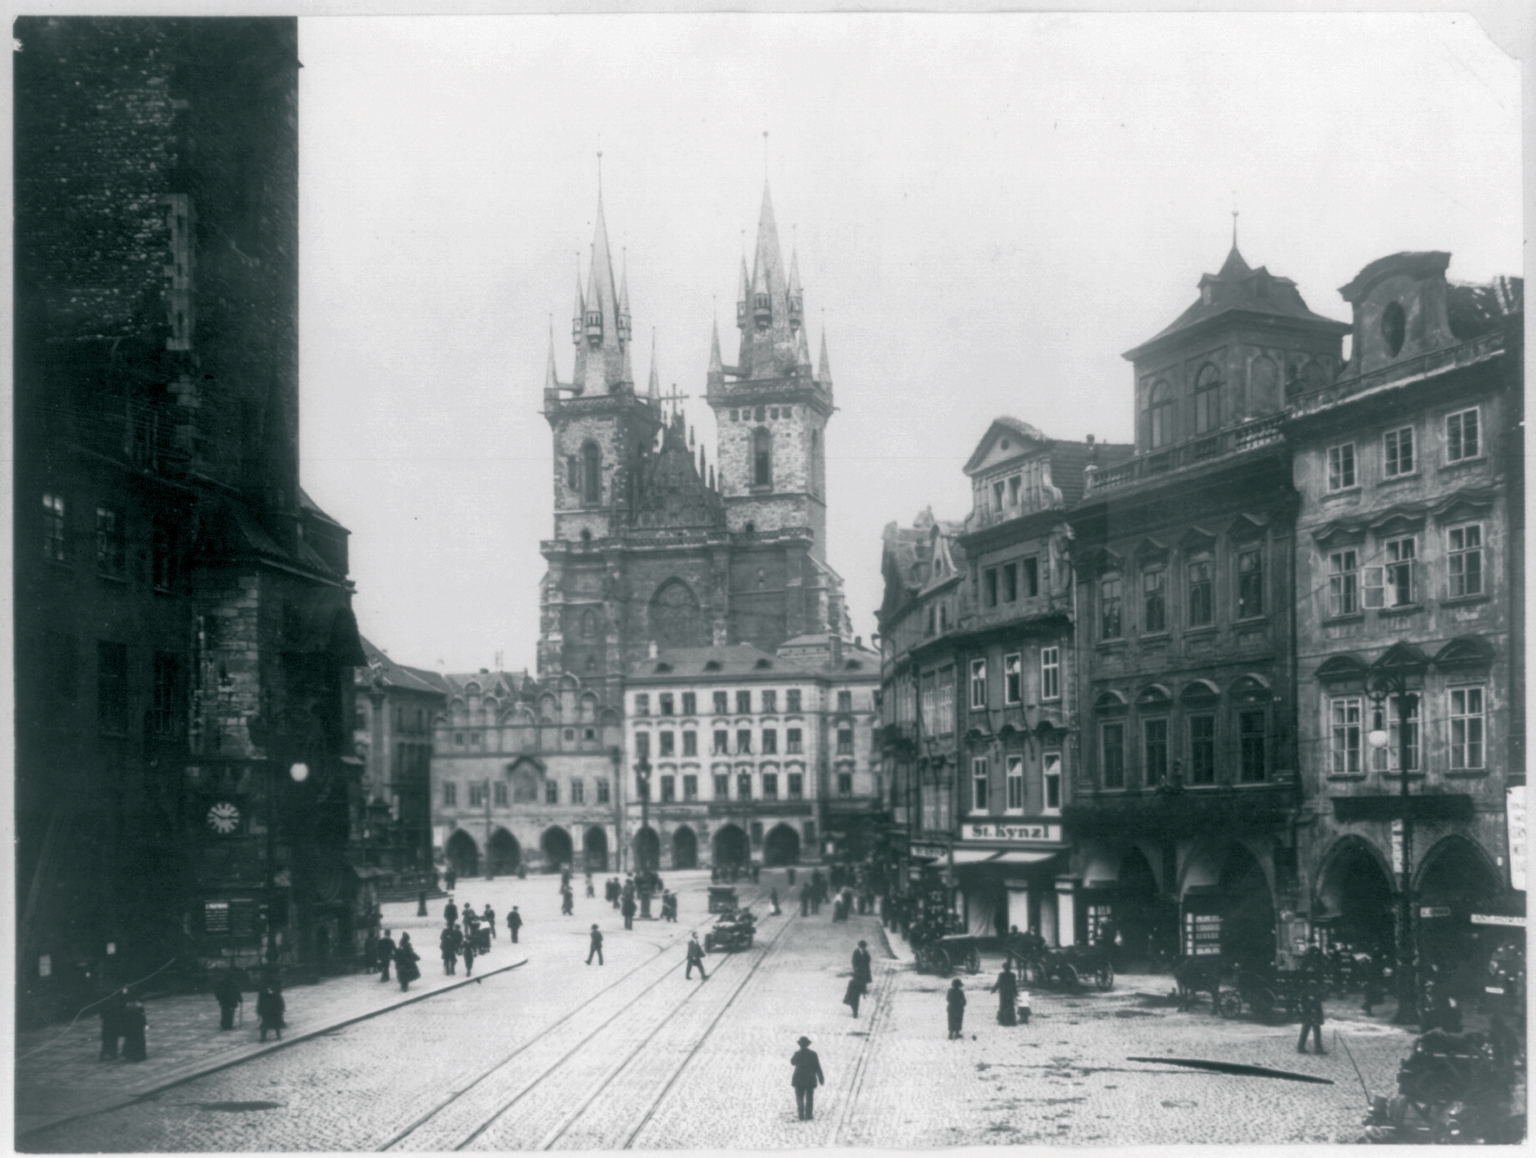 The Old City of Prague is one of Europe’s most popular tourist sites – and one of the most charming. In the 19th century, when it was built, its somewhat kitschy look was in vogue. View from the Old City toward the Charles Bridge, 1920